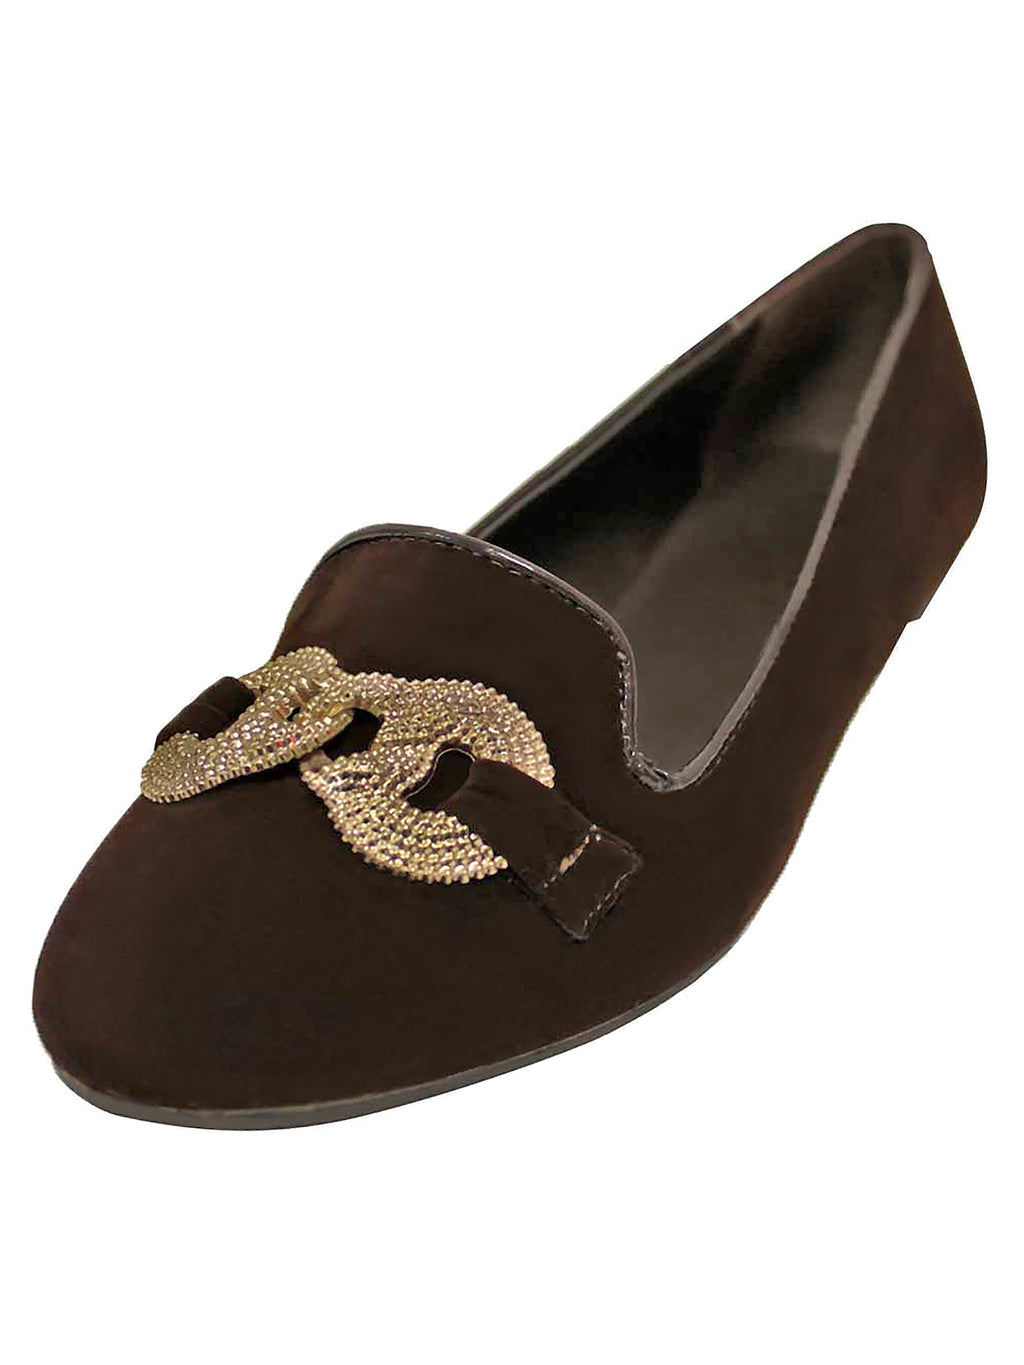 Suede Womens Ballet Flats With Silver Buckle